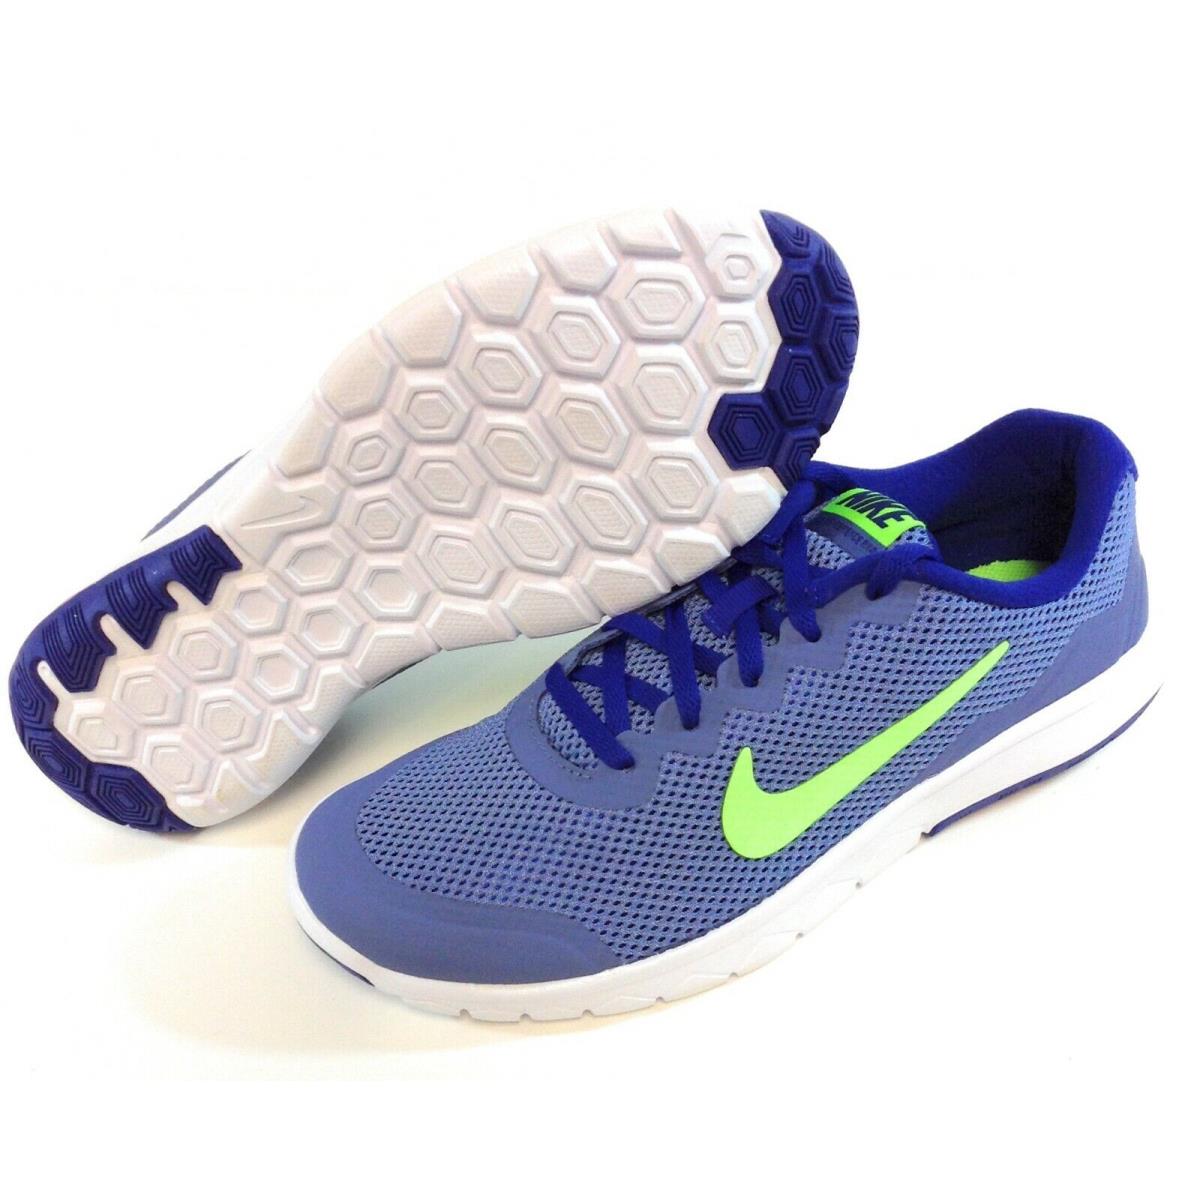 Boys Kids Youth Nike Flex Experience 4 749807 402 Blue Green Sneakers Shoes - Blue